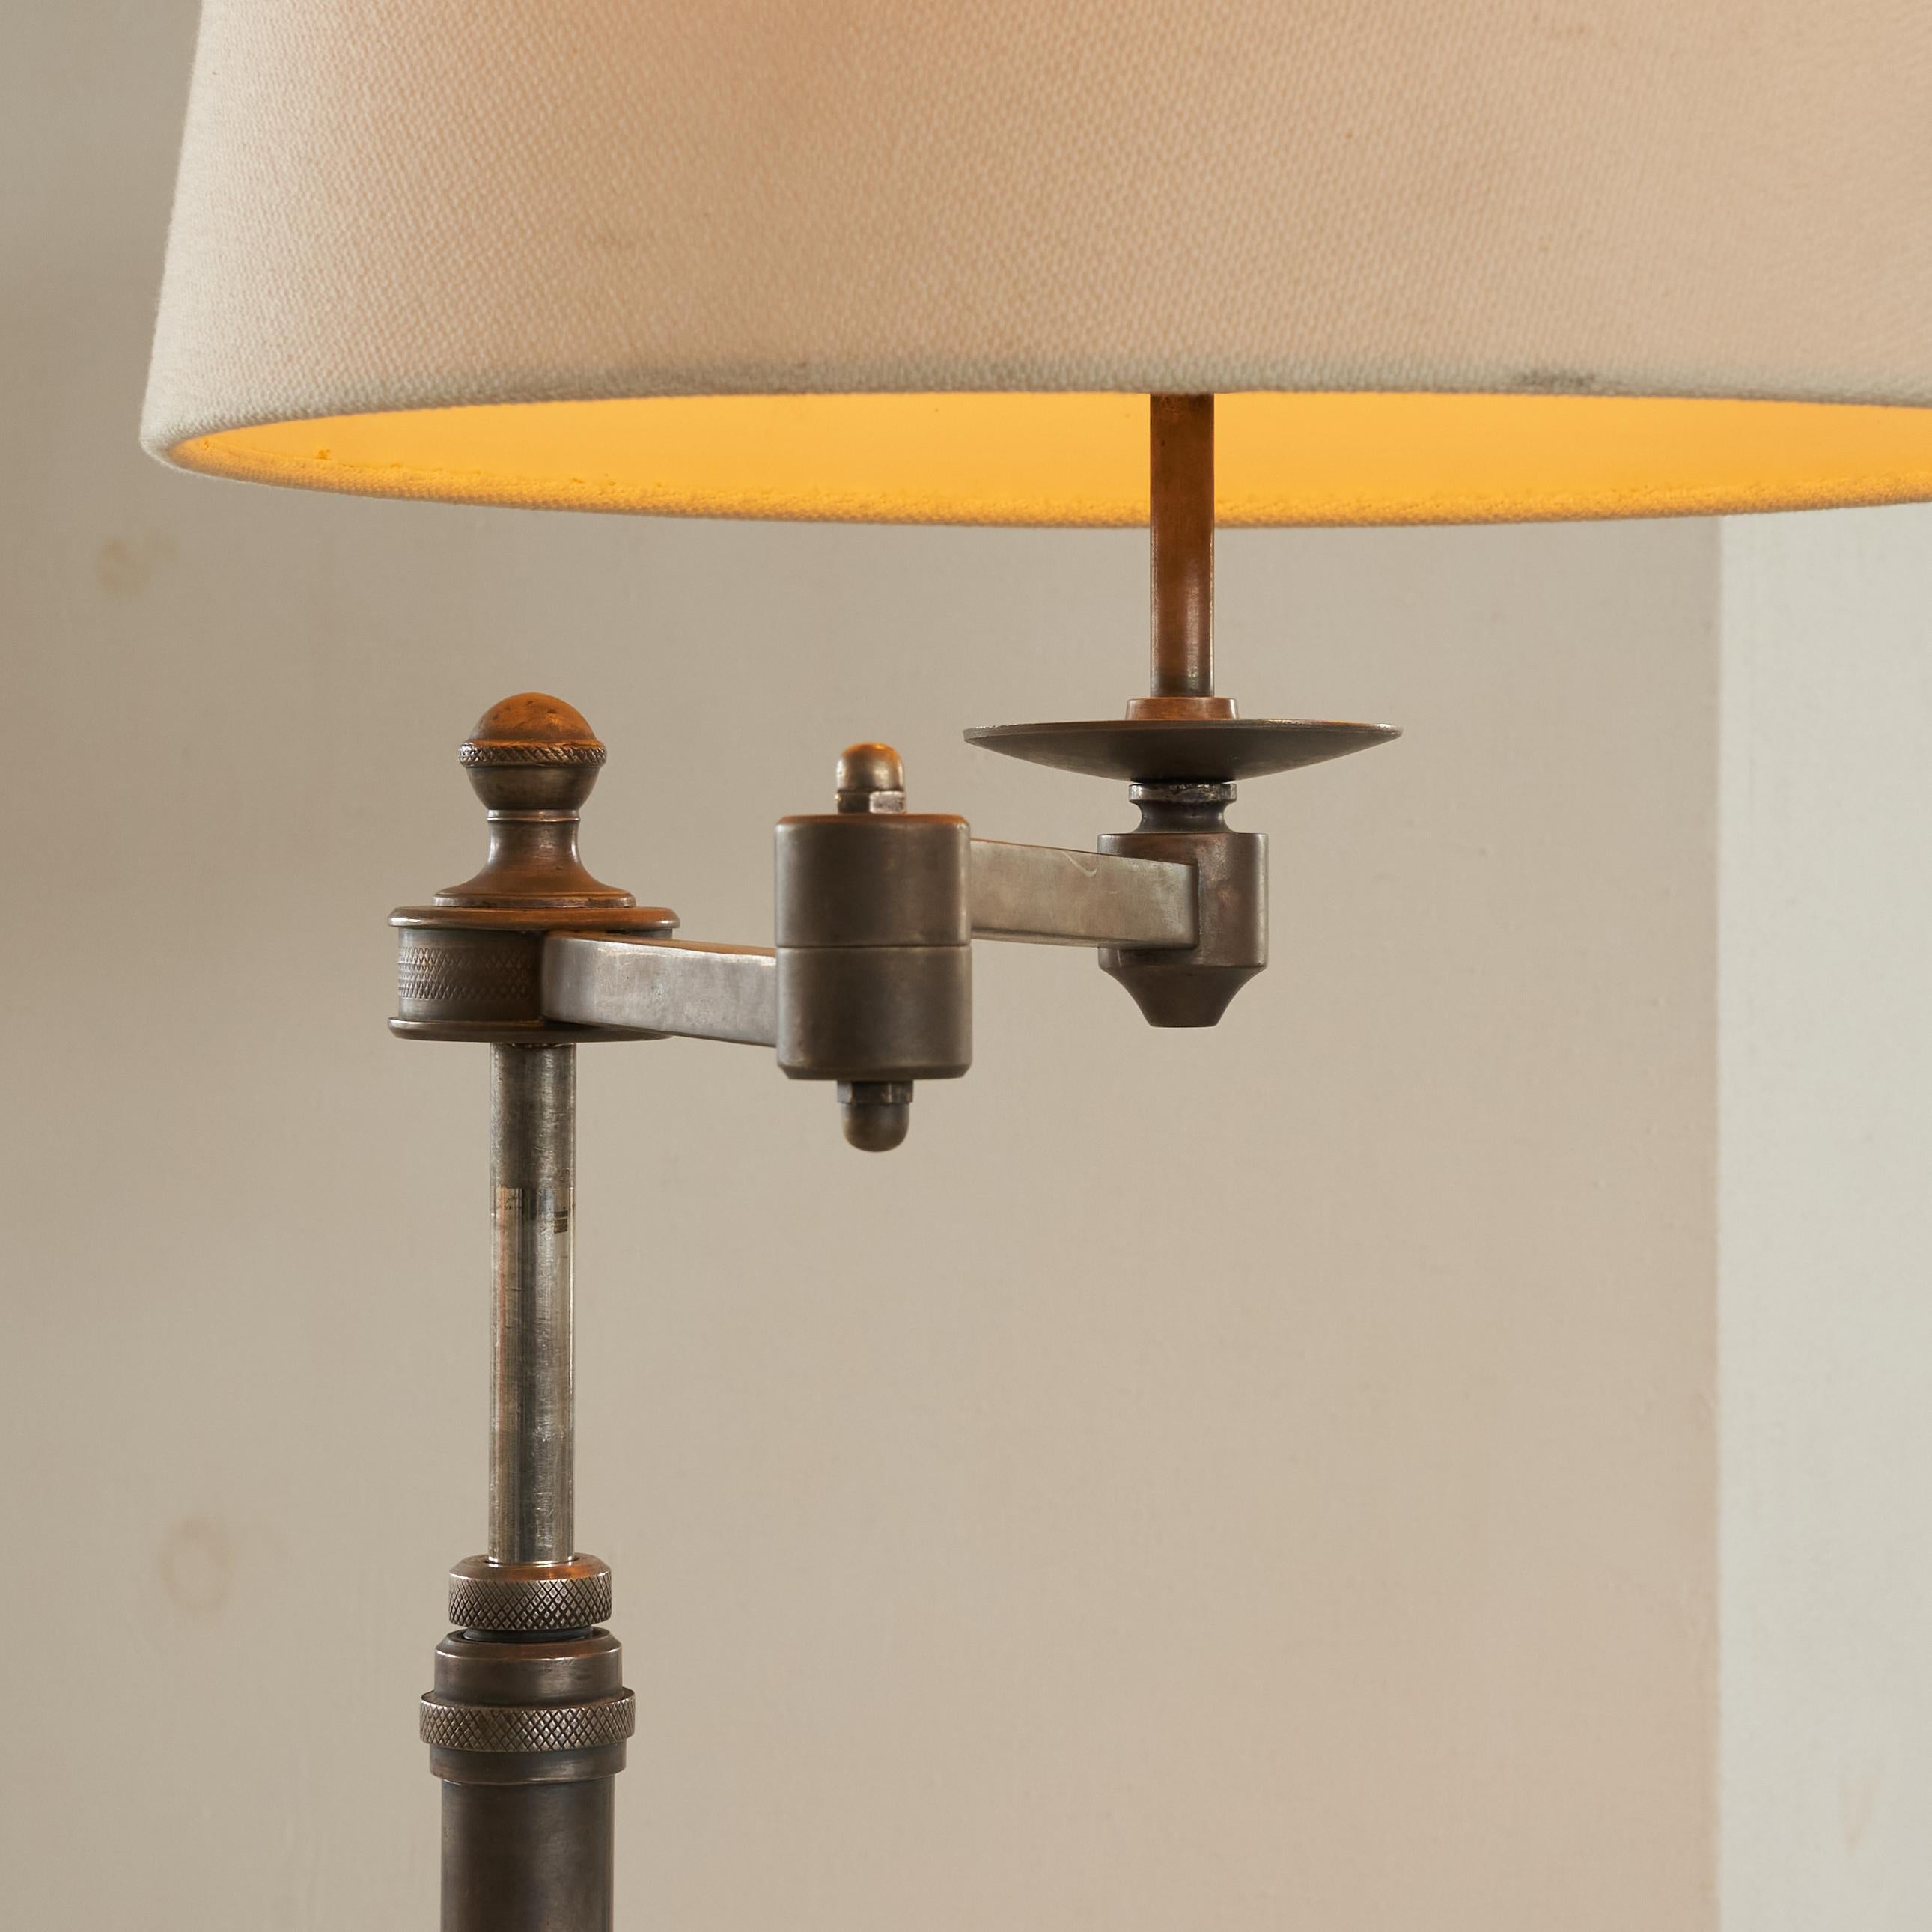 Italian Articulating Swivel Table Lamp in Metal 1970s For Sale 3